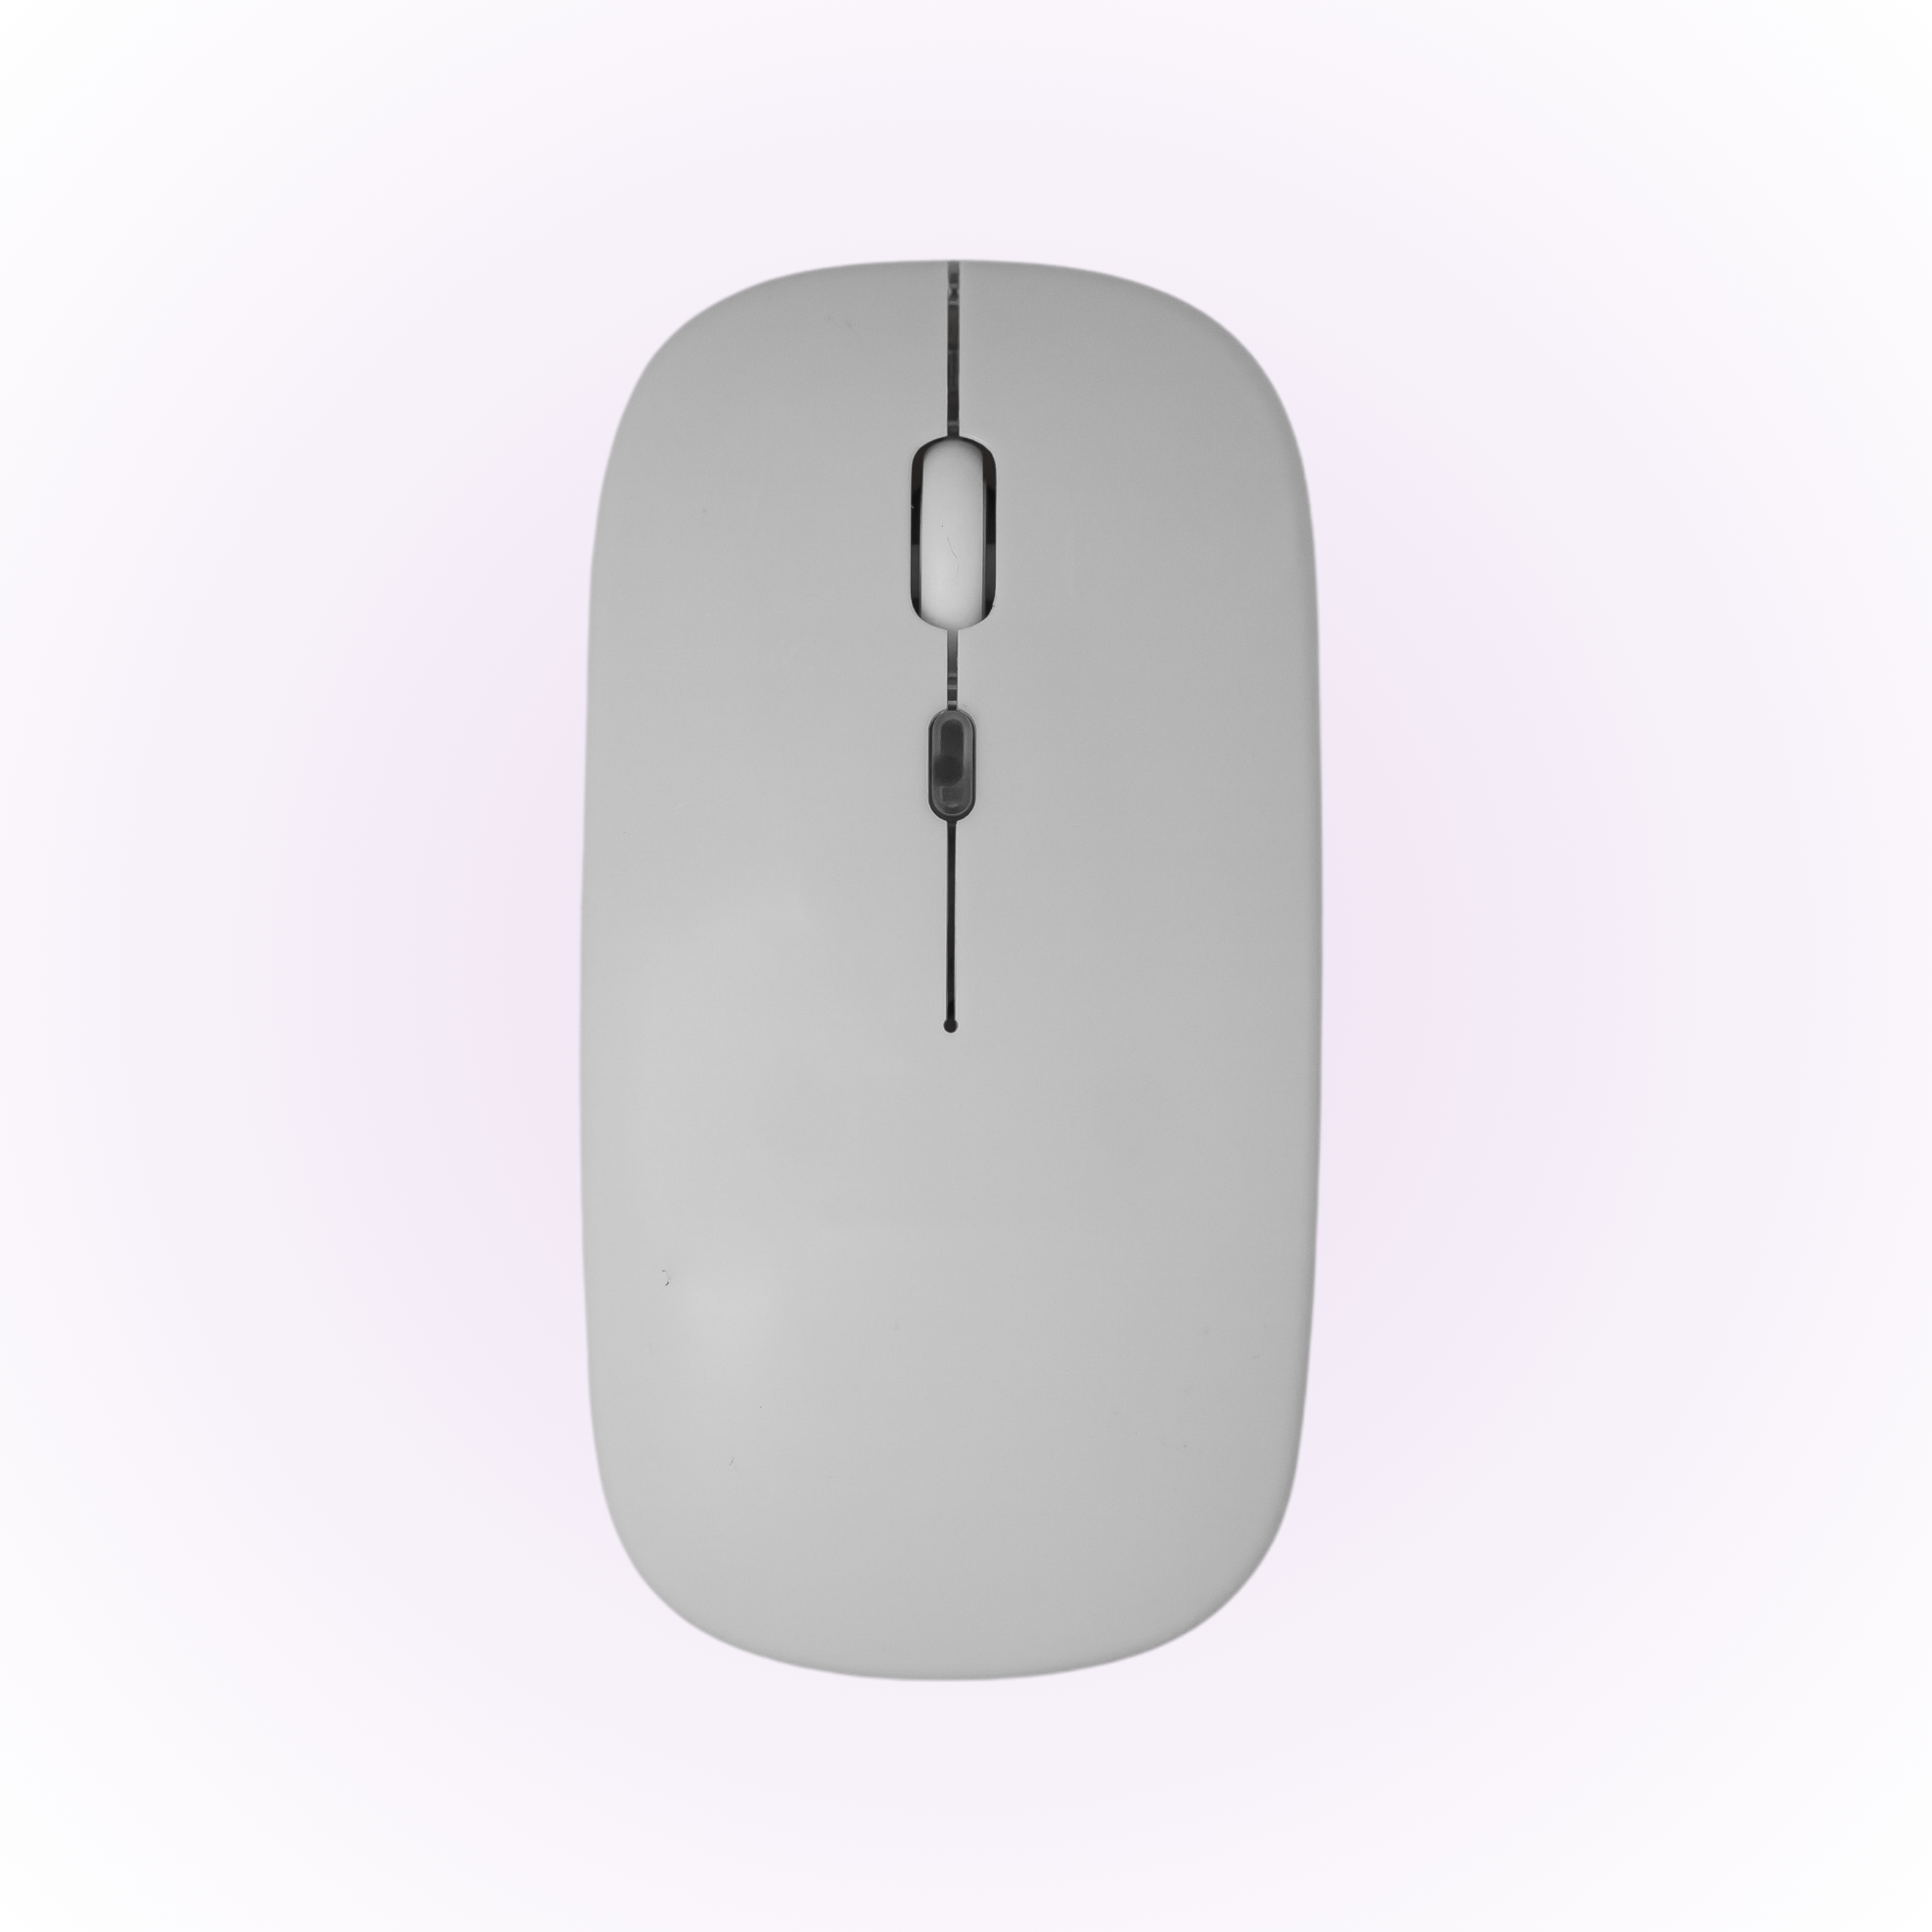 straight white bluetooth mouse pointing up on white background